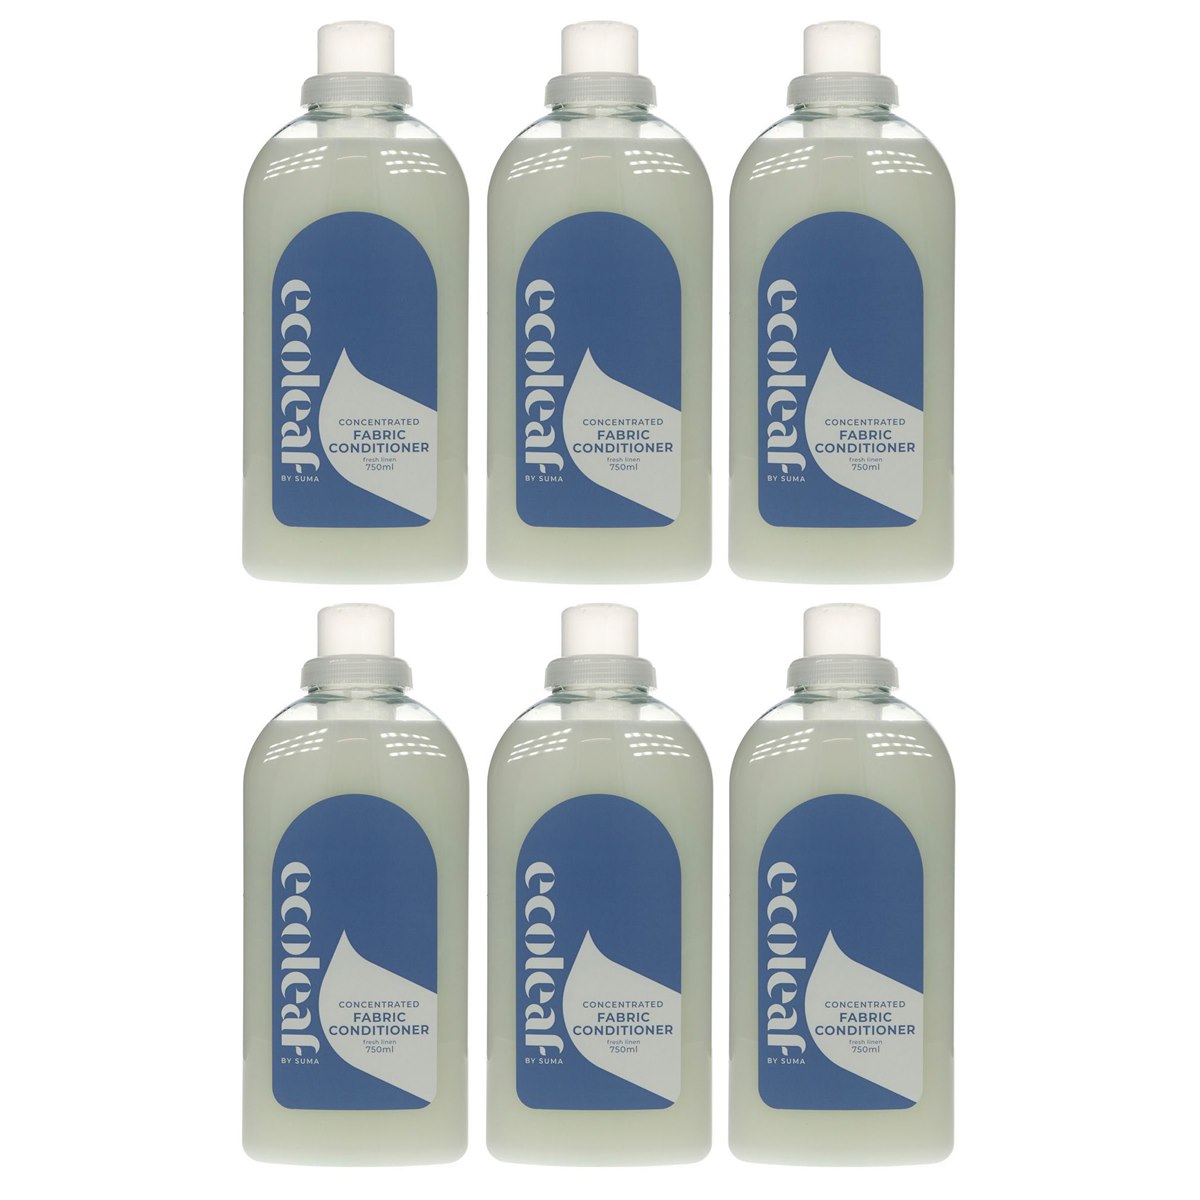 Case of 6 x Ecoleaf By Suma Concentrated Fabric Conditioner Fresh Linen 750ml